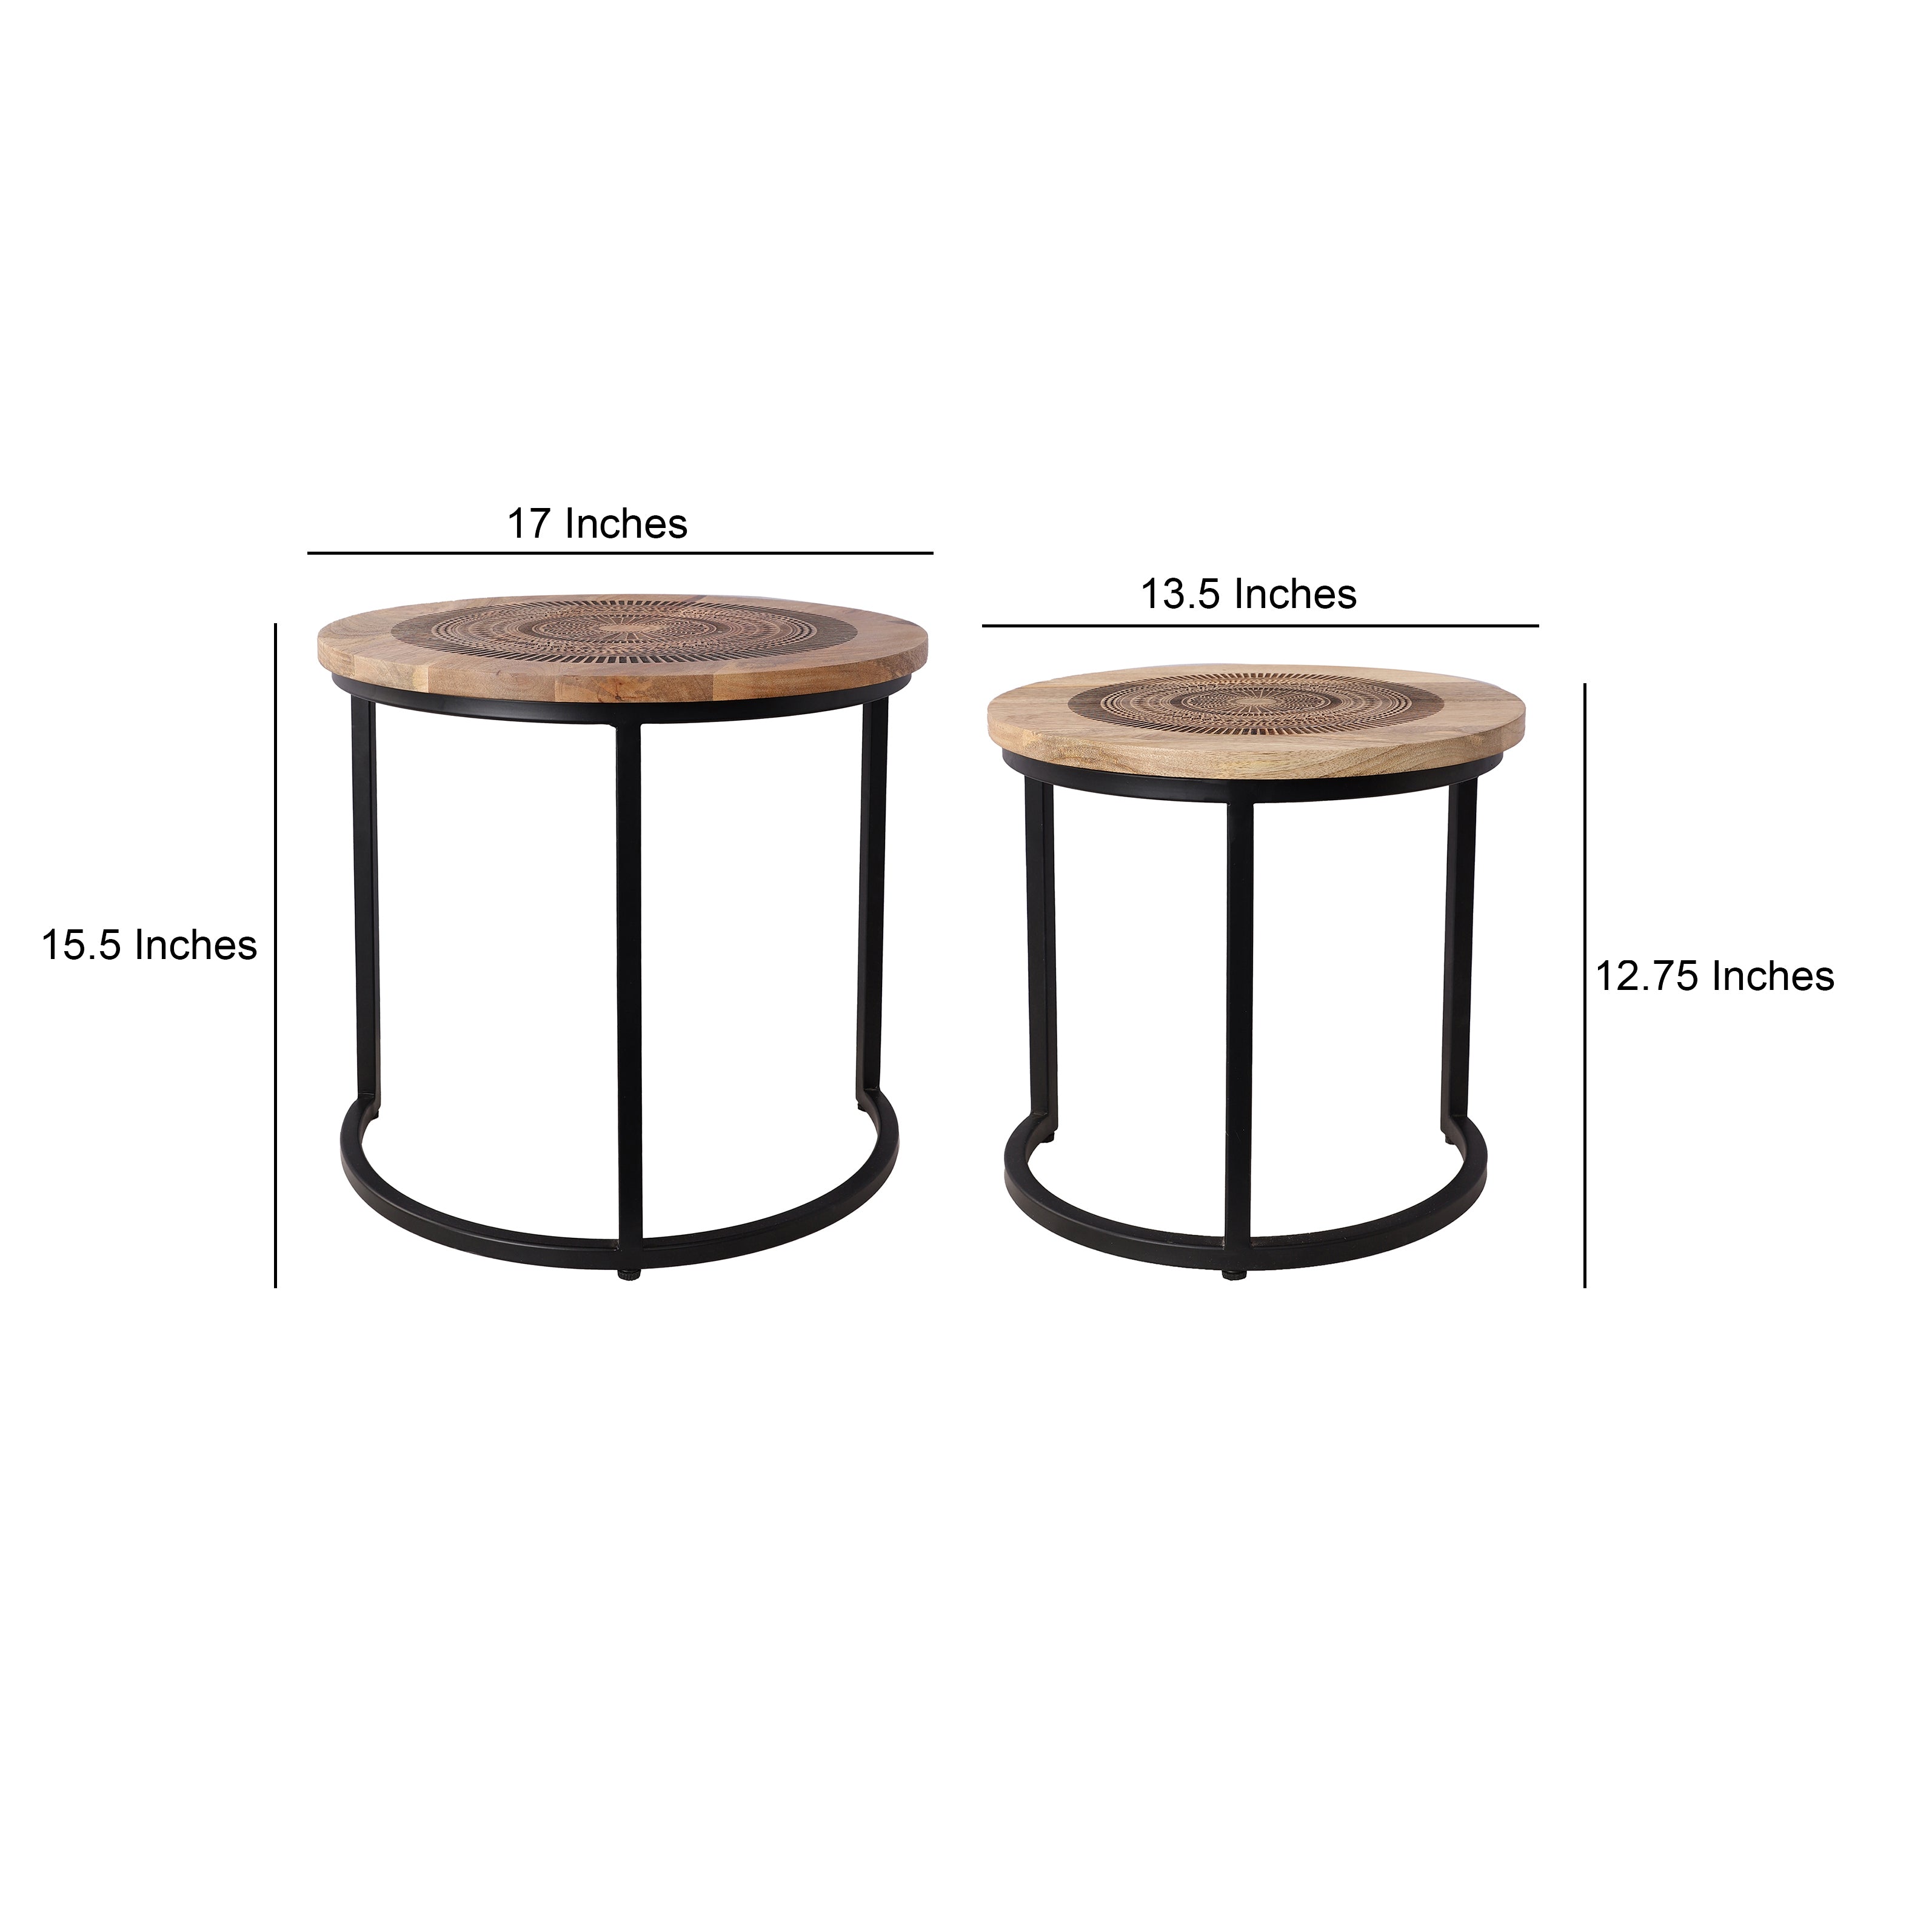 Wood and Metal Nested Tables/Stools (Set of 2)